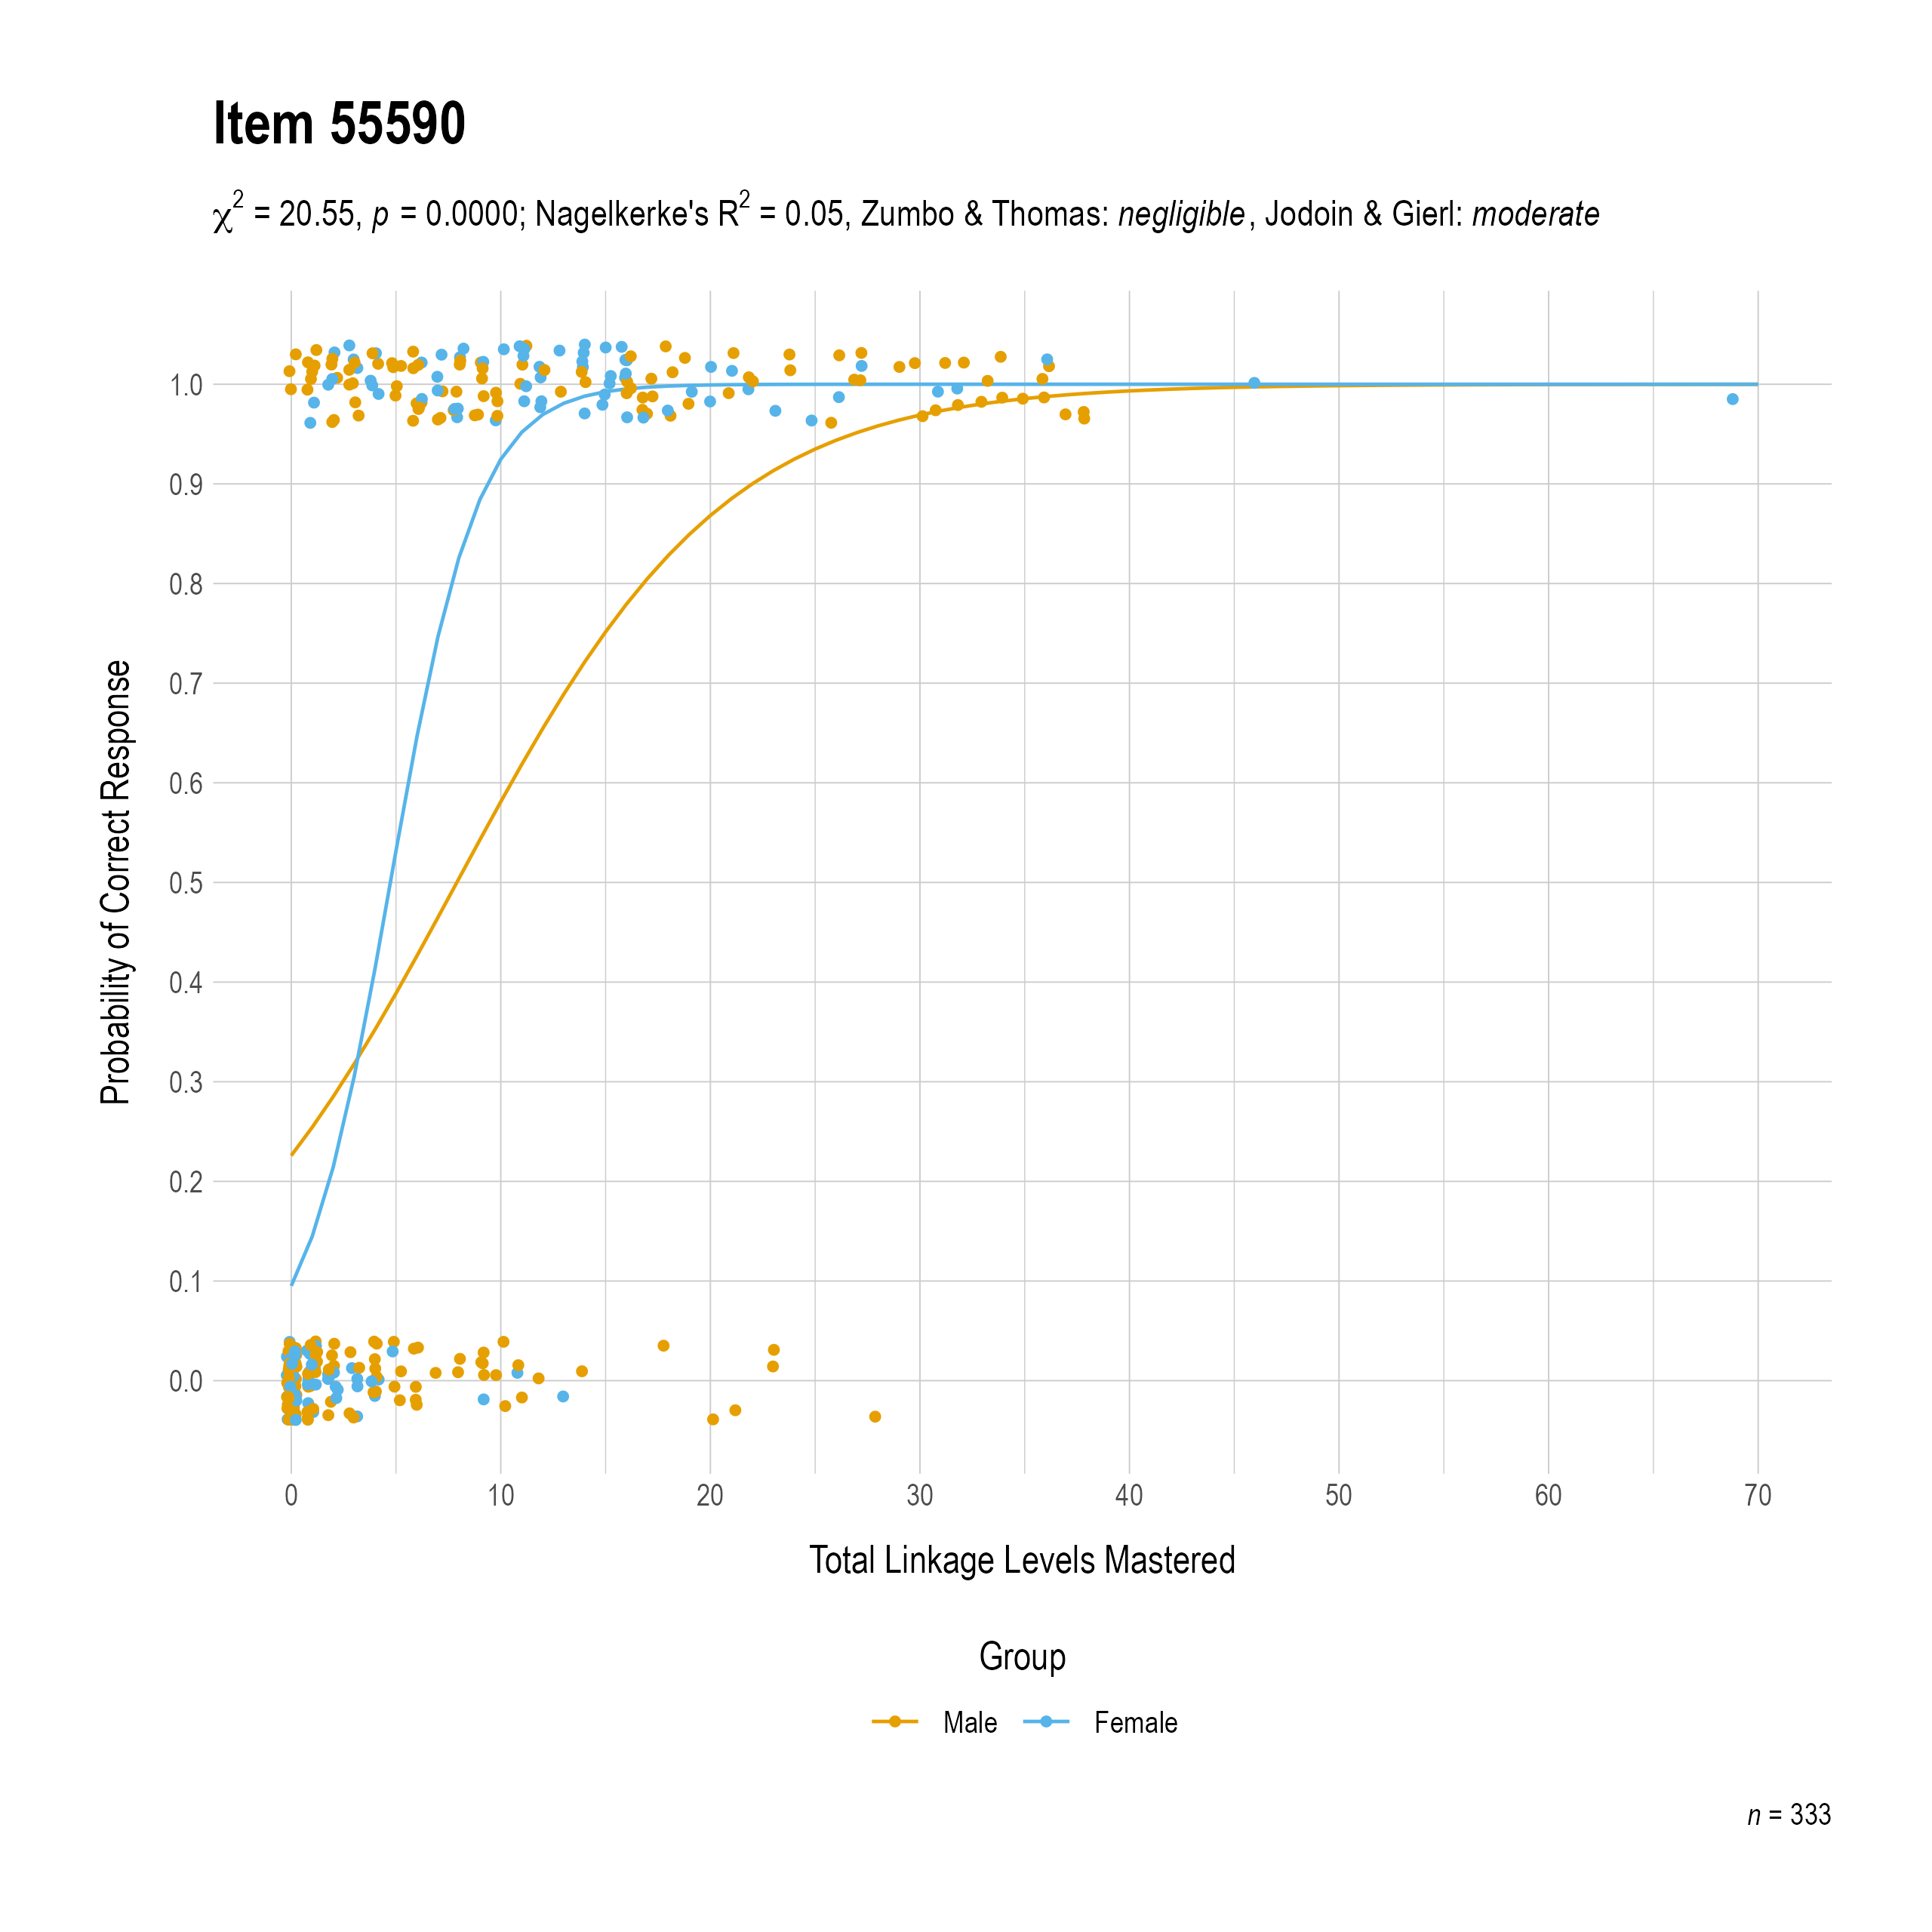 The plot of the combined gender differential item function evidence for English language arts item 55590. The figure contains points shaded by group. The figure also contains a logistic regression curve for each group. The total linkage levels mastered in is on the x-axis, and the probability of a correct response is on the y-axis.